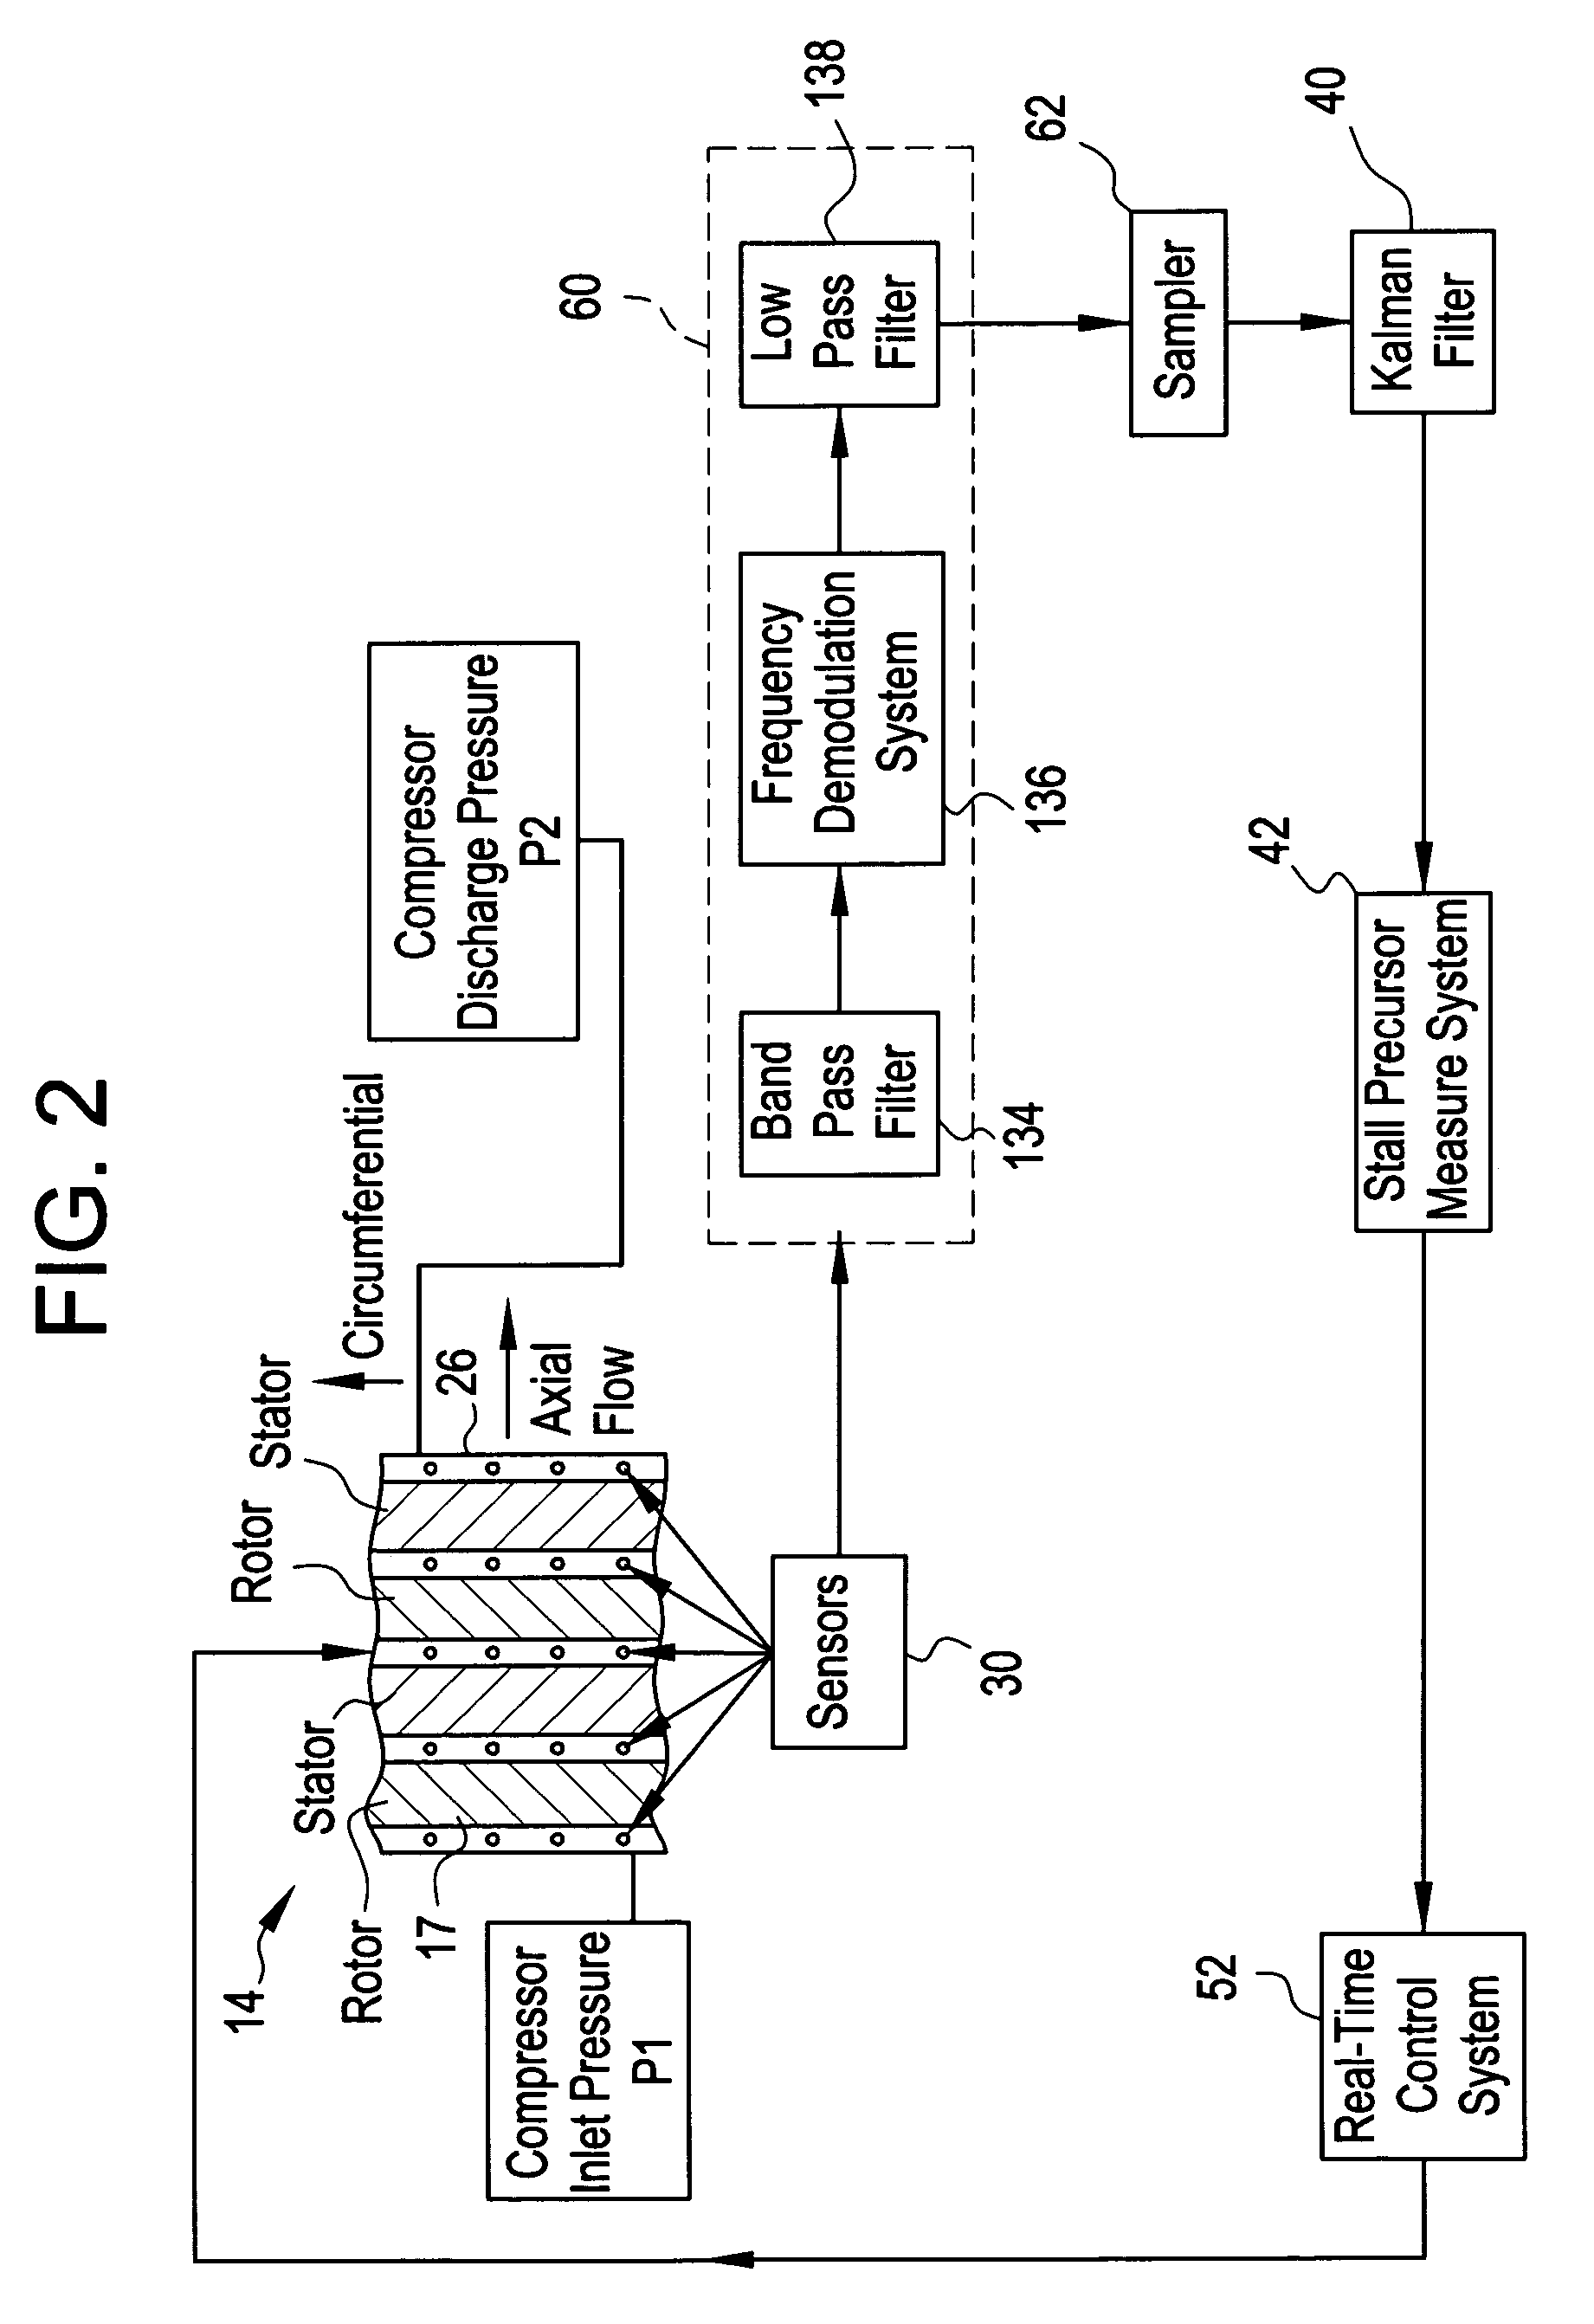 Method and system for detecting precursors to compressor stall and surge